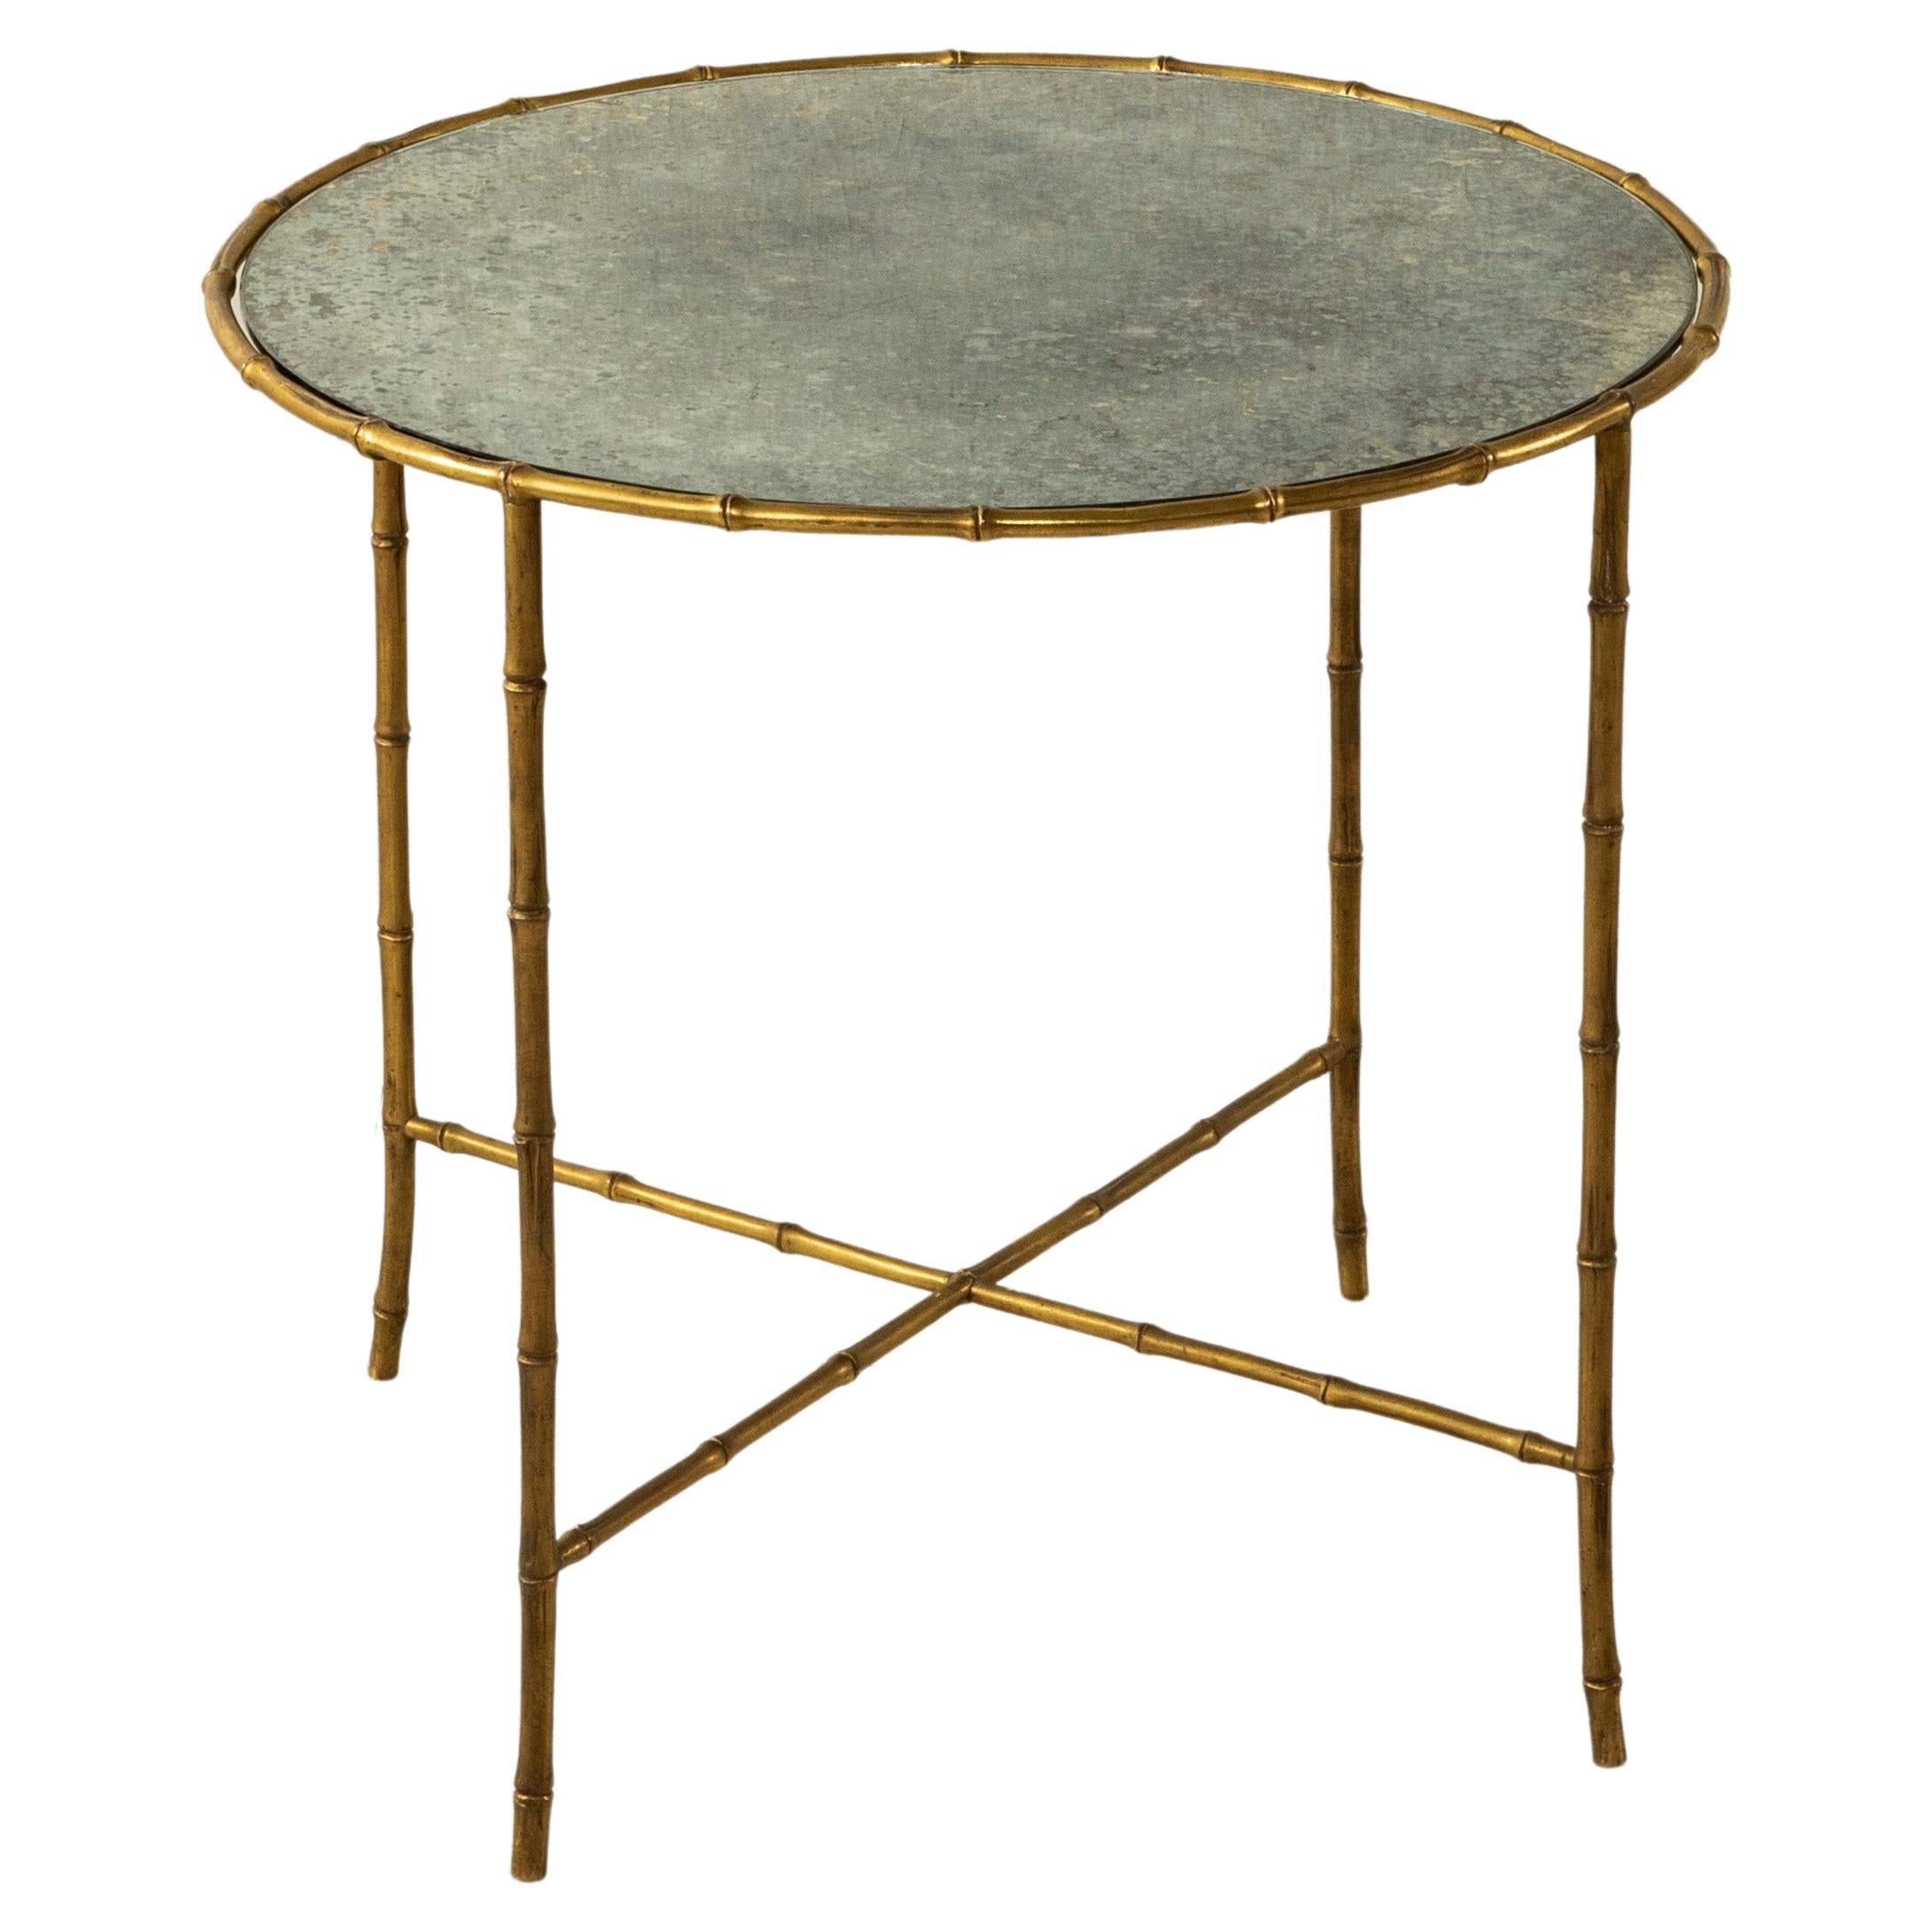 Mid-20th Century French Maison Bagues Faux Bamboo Bronze and Glass Side Table